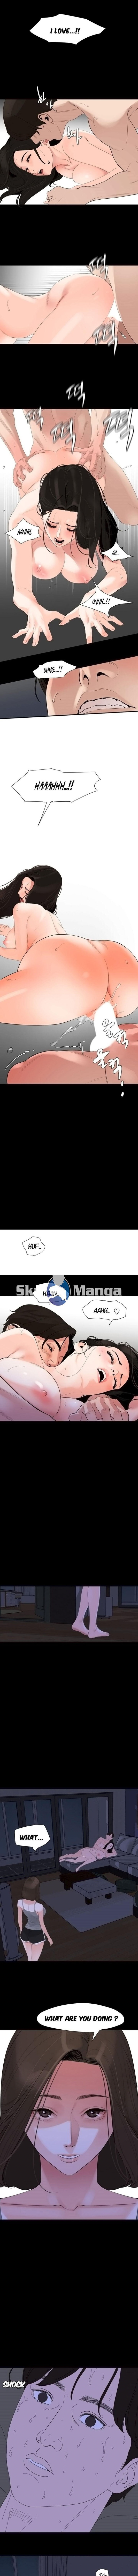 [Kkamja] Don't be like this son-in-law [English] 89